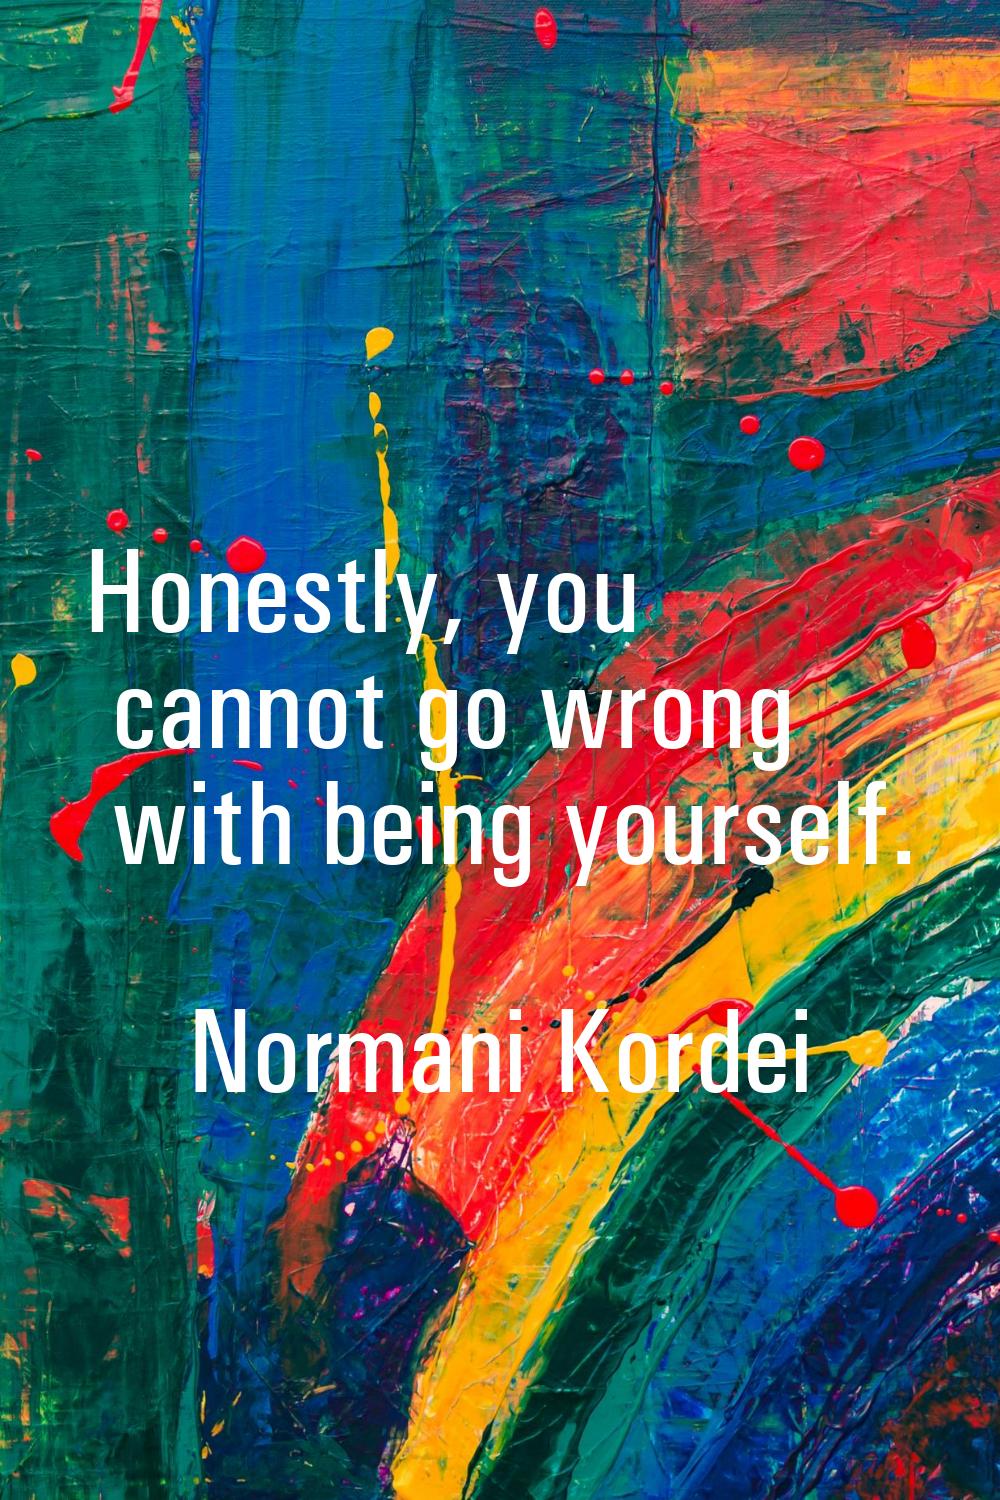 Honestly, you cannot go wrong with being yourself.